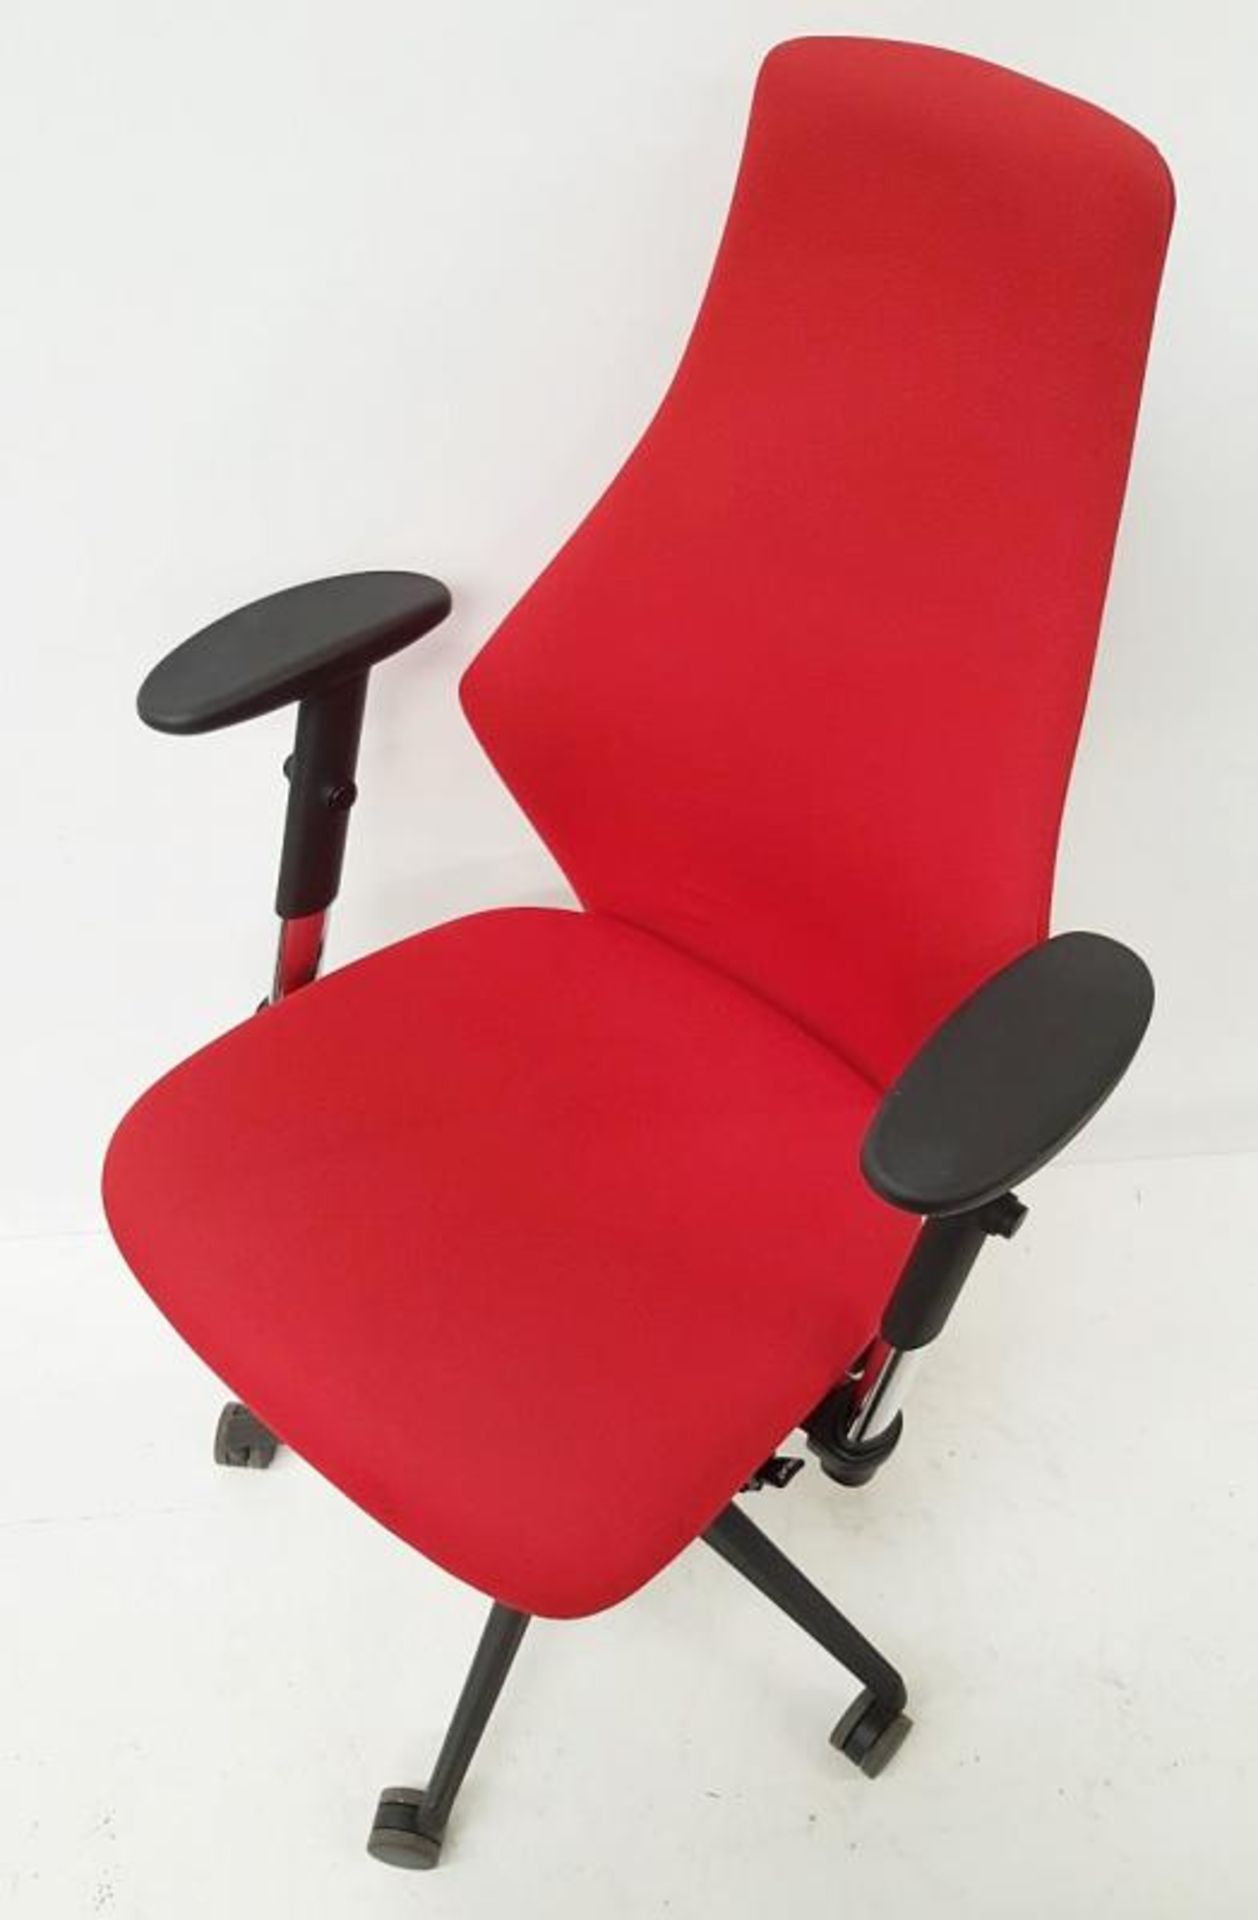 A Pair Of LIMA Branded Premium Adjustable Office Chairs Featuring Fixed Lumbar Support And Arm Rests - Image 5 of 7